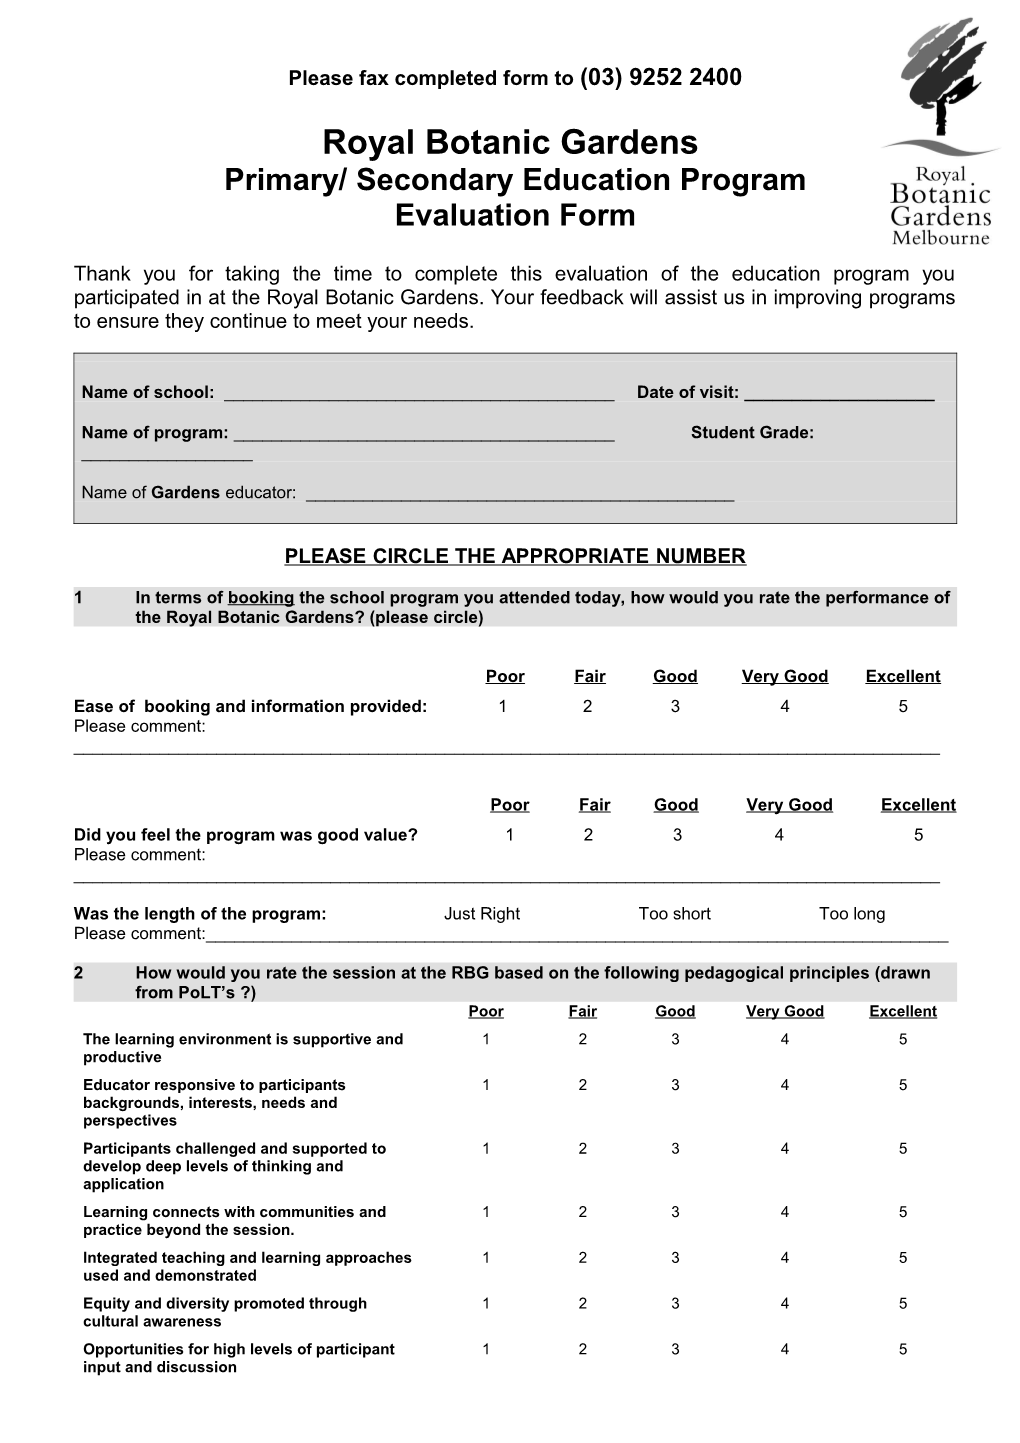 Thank You for Taking the Time to Complete This Evaluation of the Education Program You